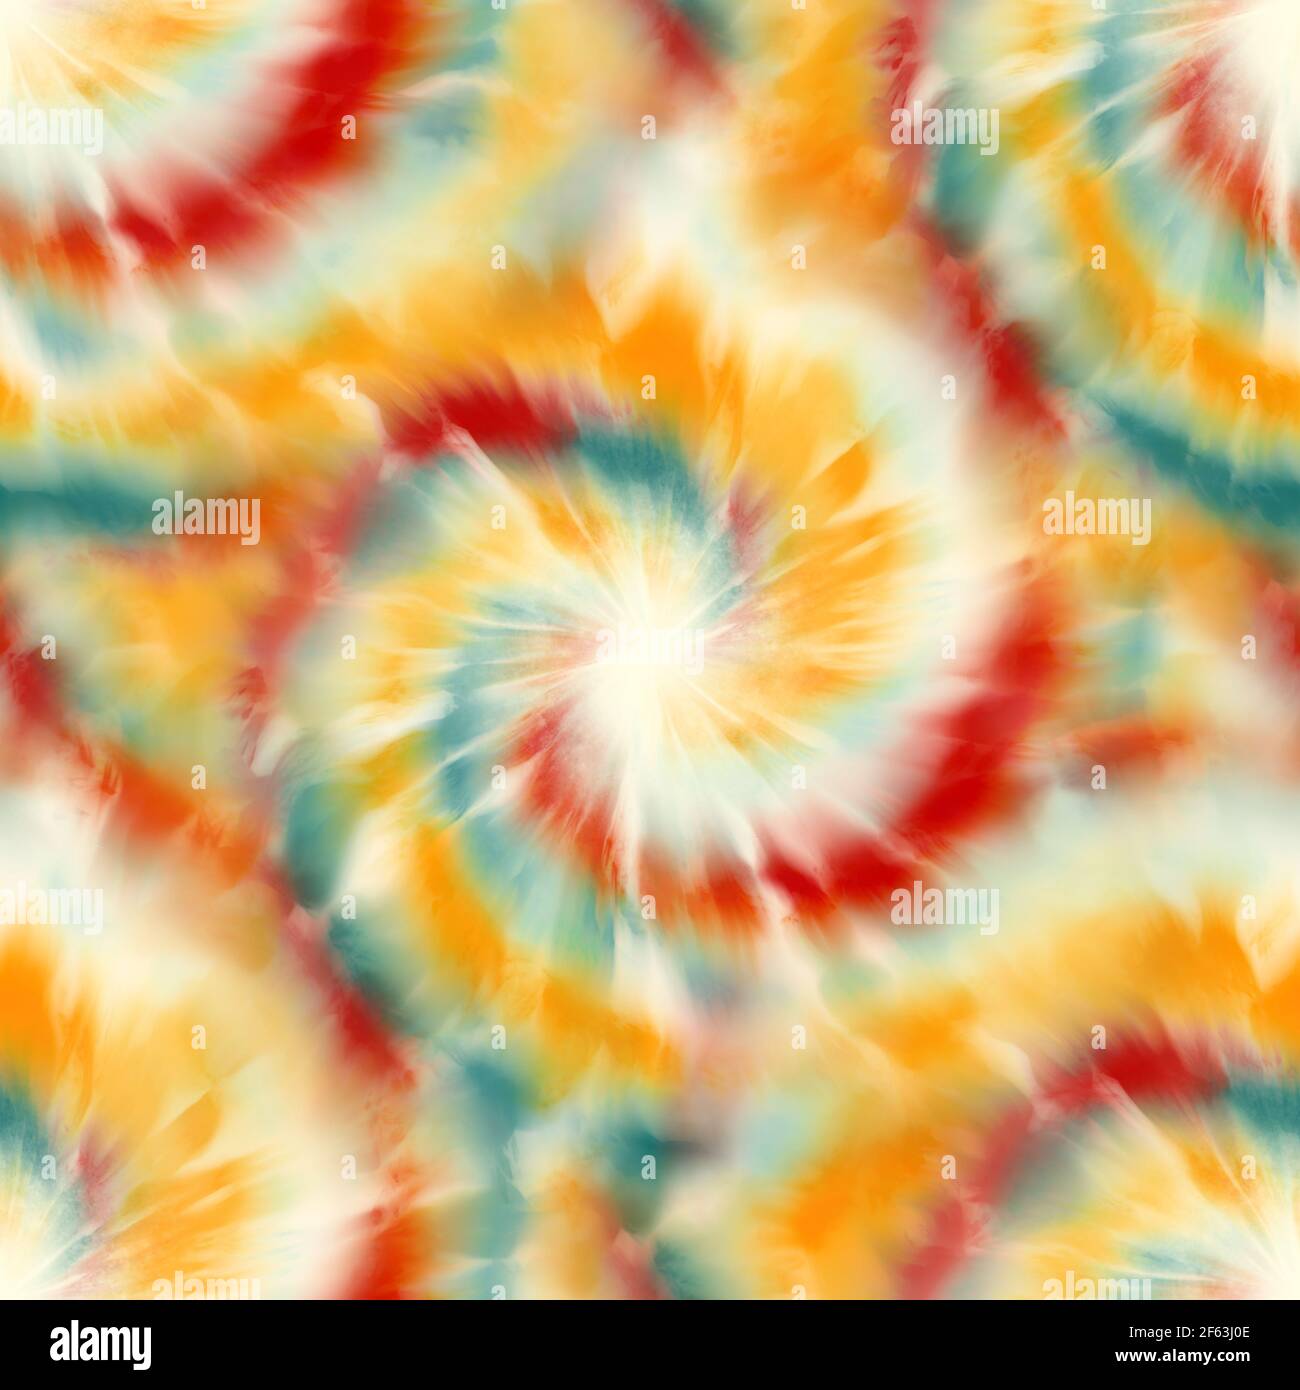 Seamless Spiral Tie Dye Pattern For Surface Design Print Stock Photo